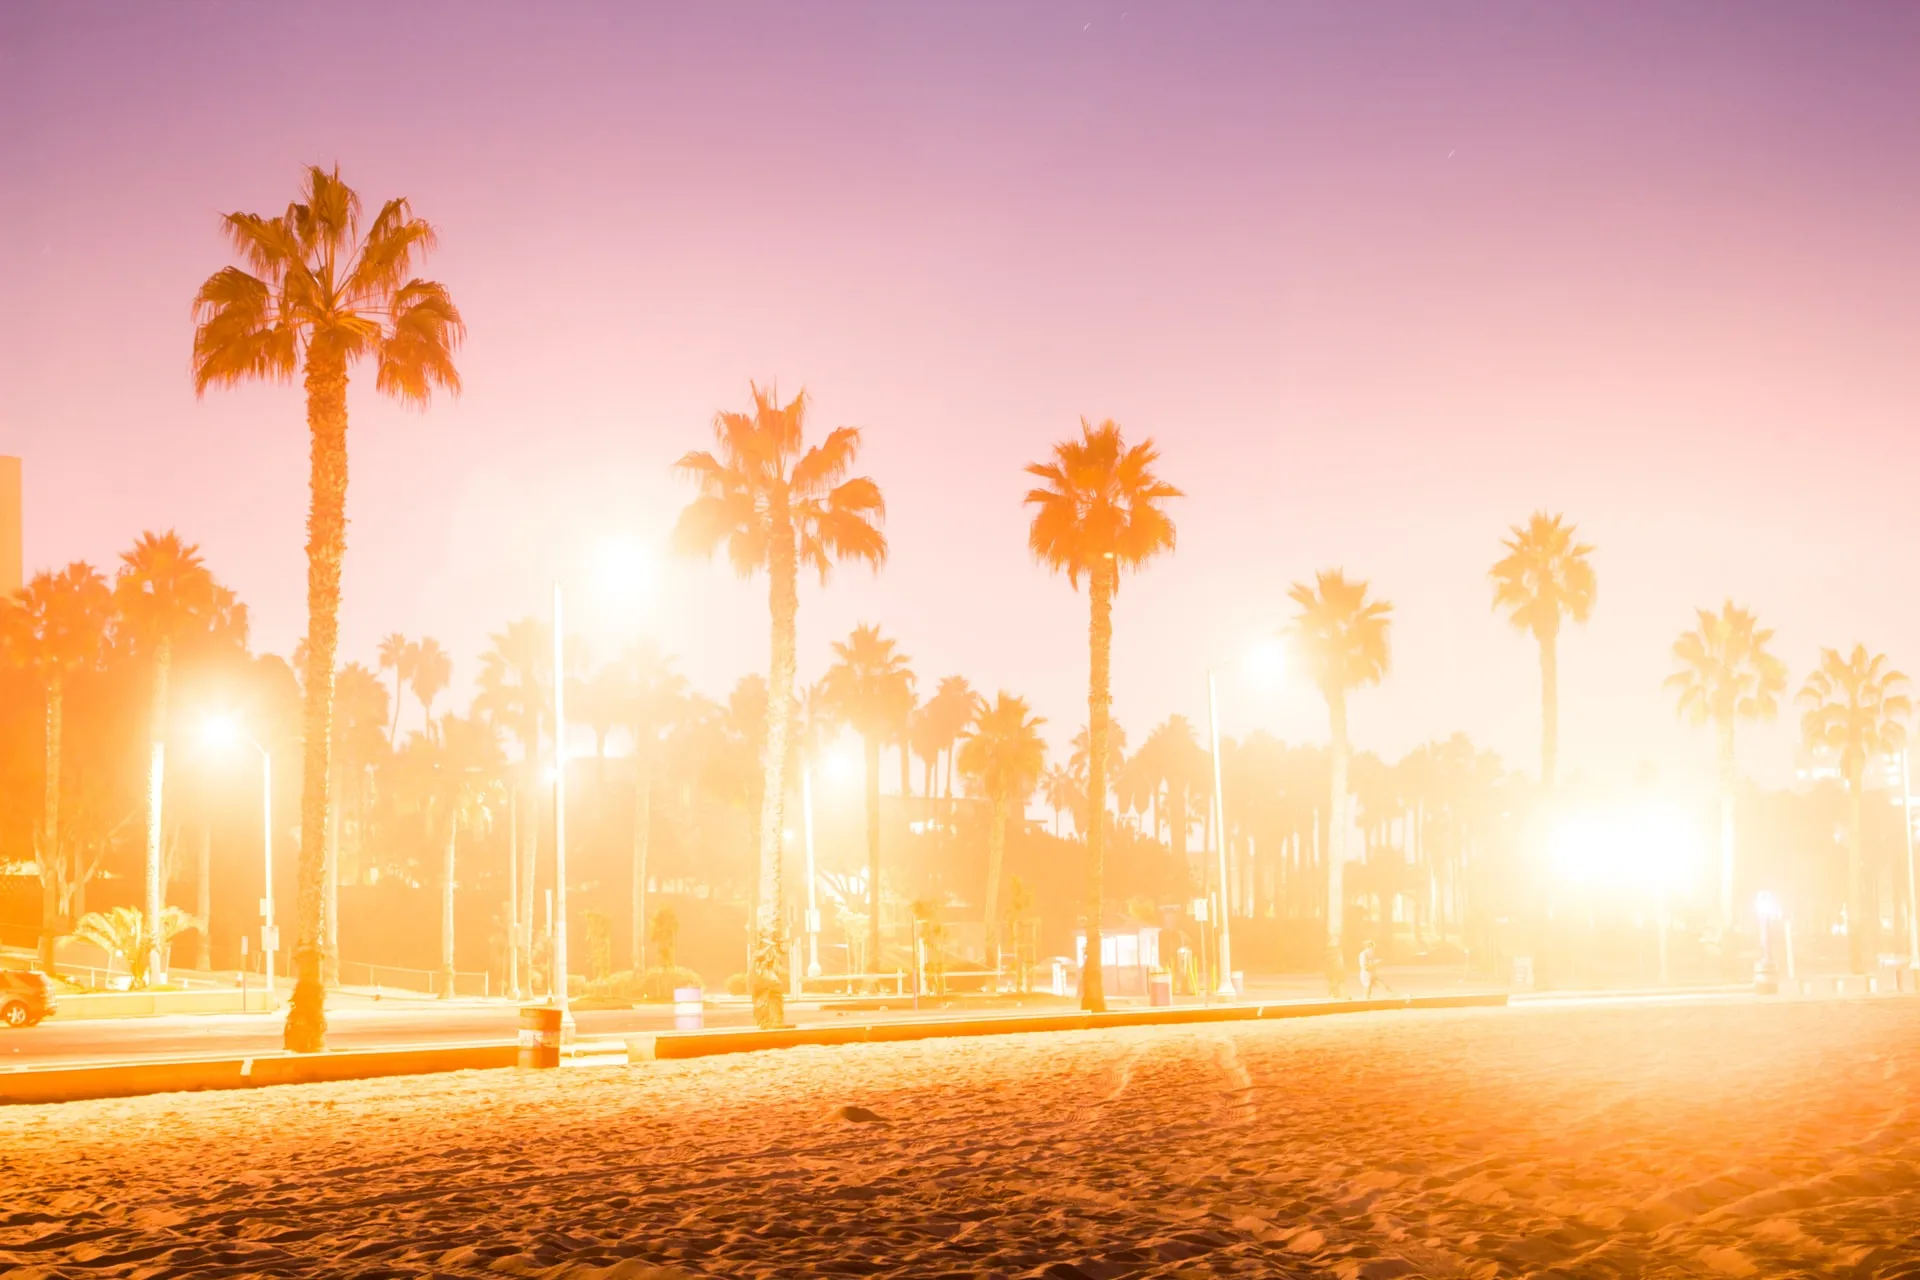 Beach with palm trees on a sunset